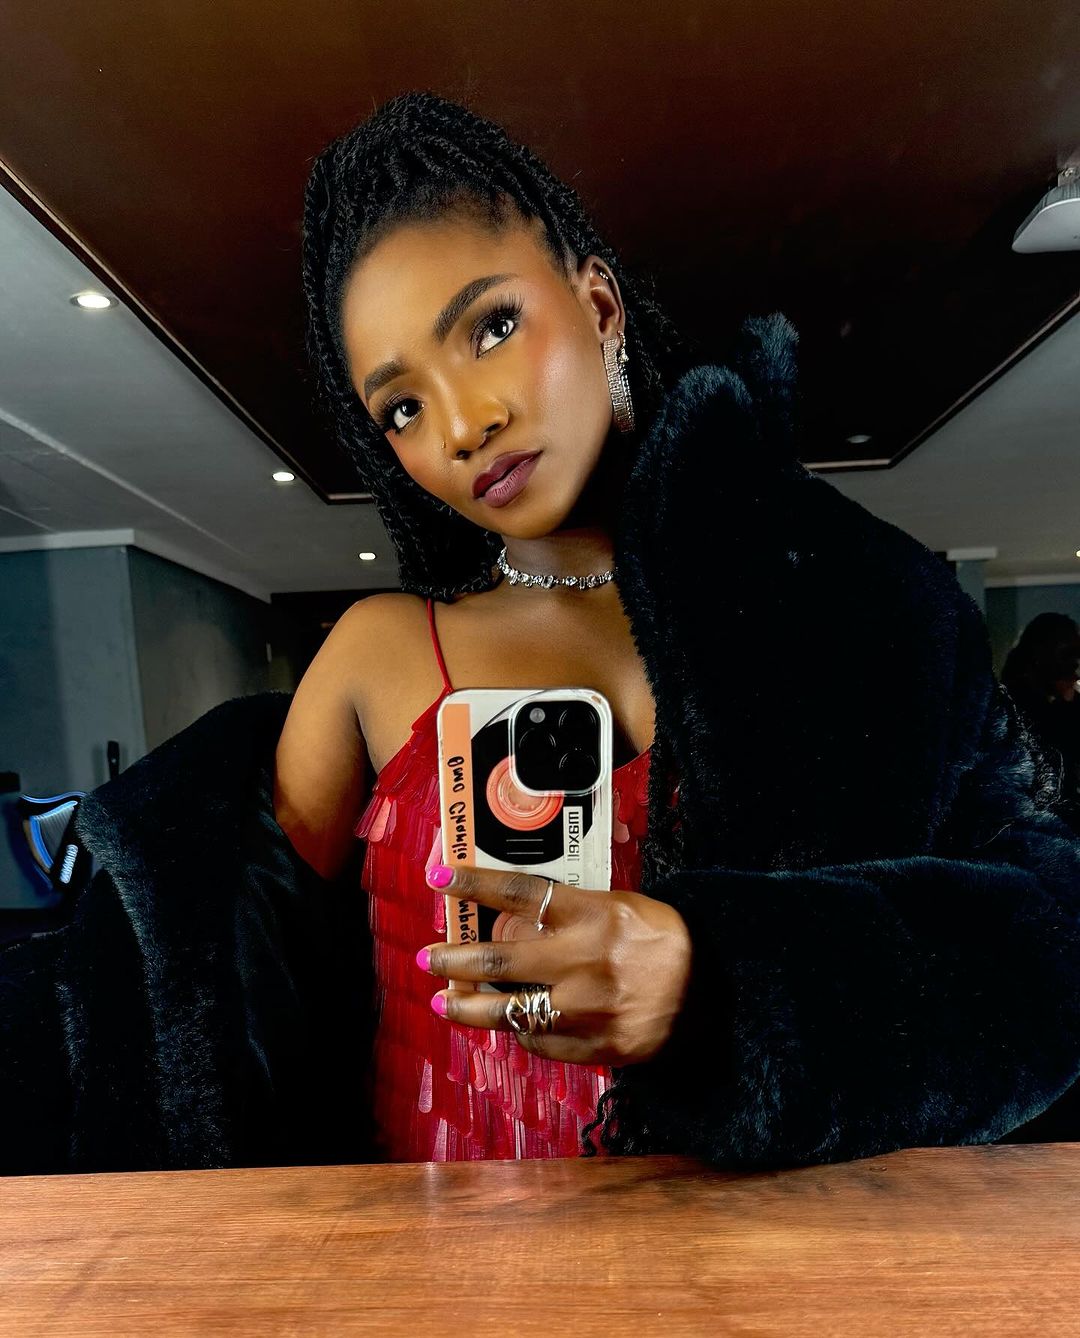 “Don’t start what you can’t finish, hon,” -- Simi warns troll